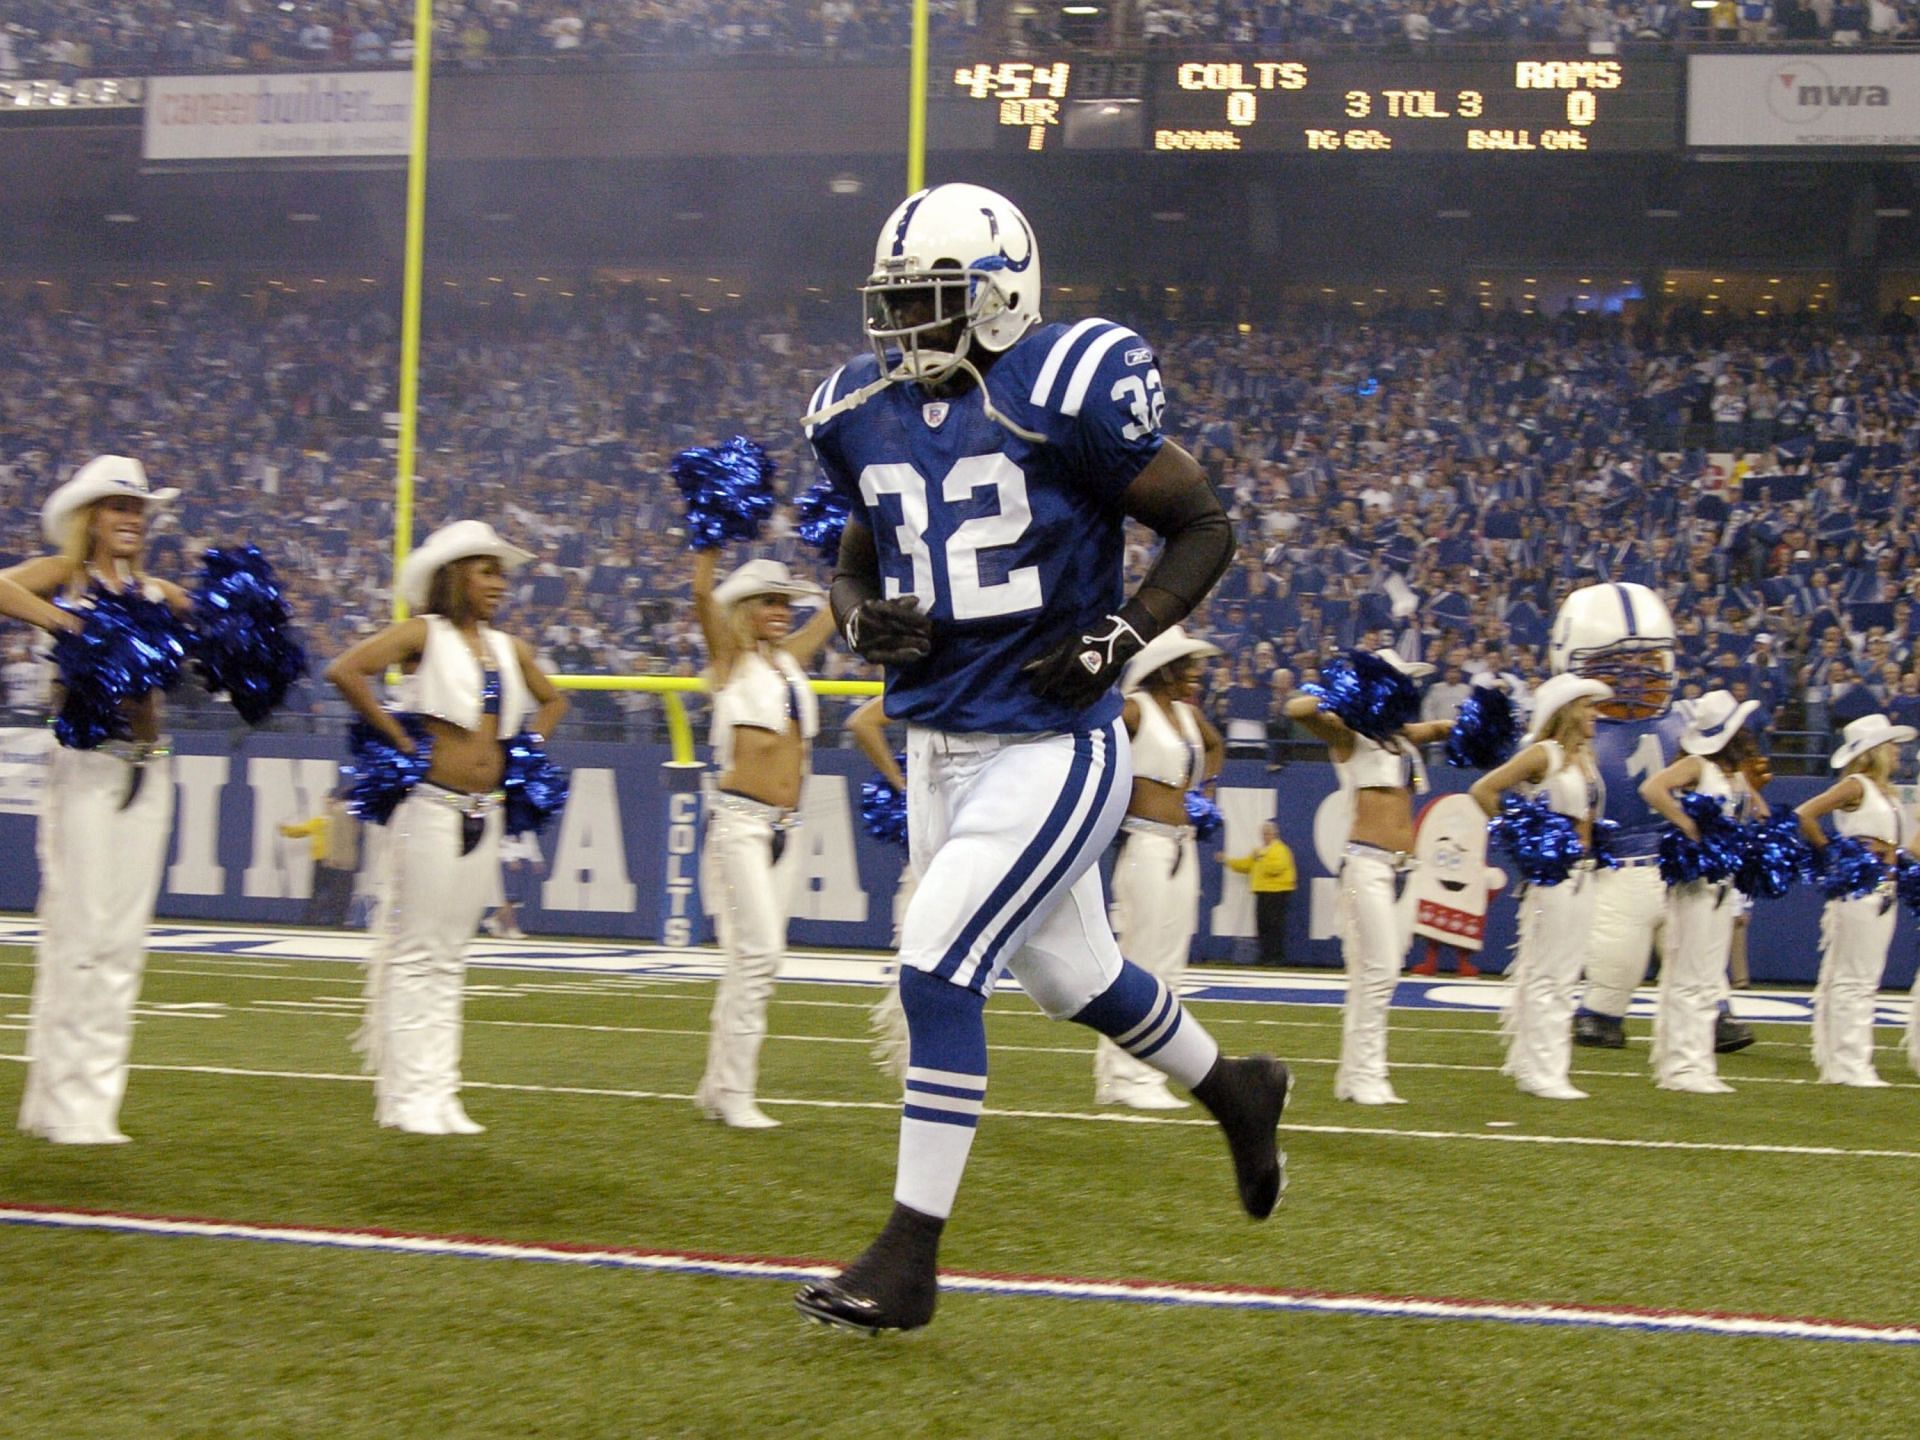 Former Indianapolis Colts running back Edgerrin James